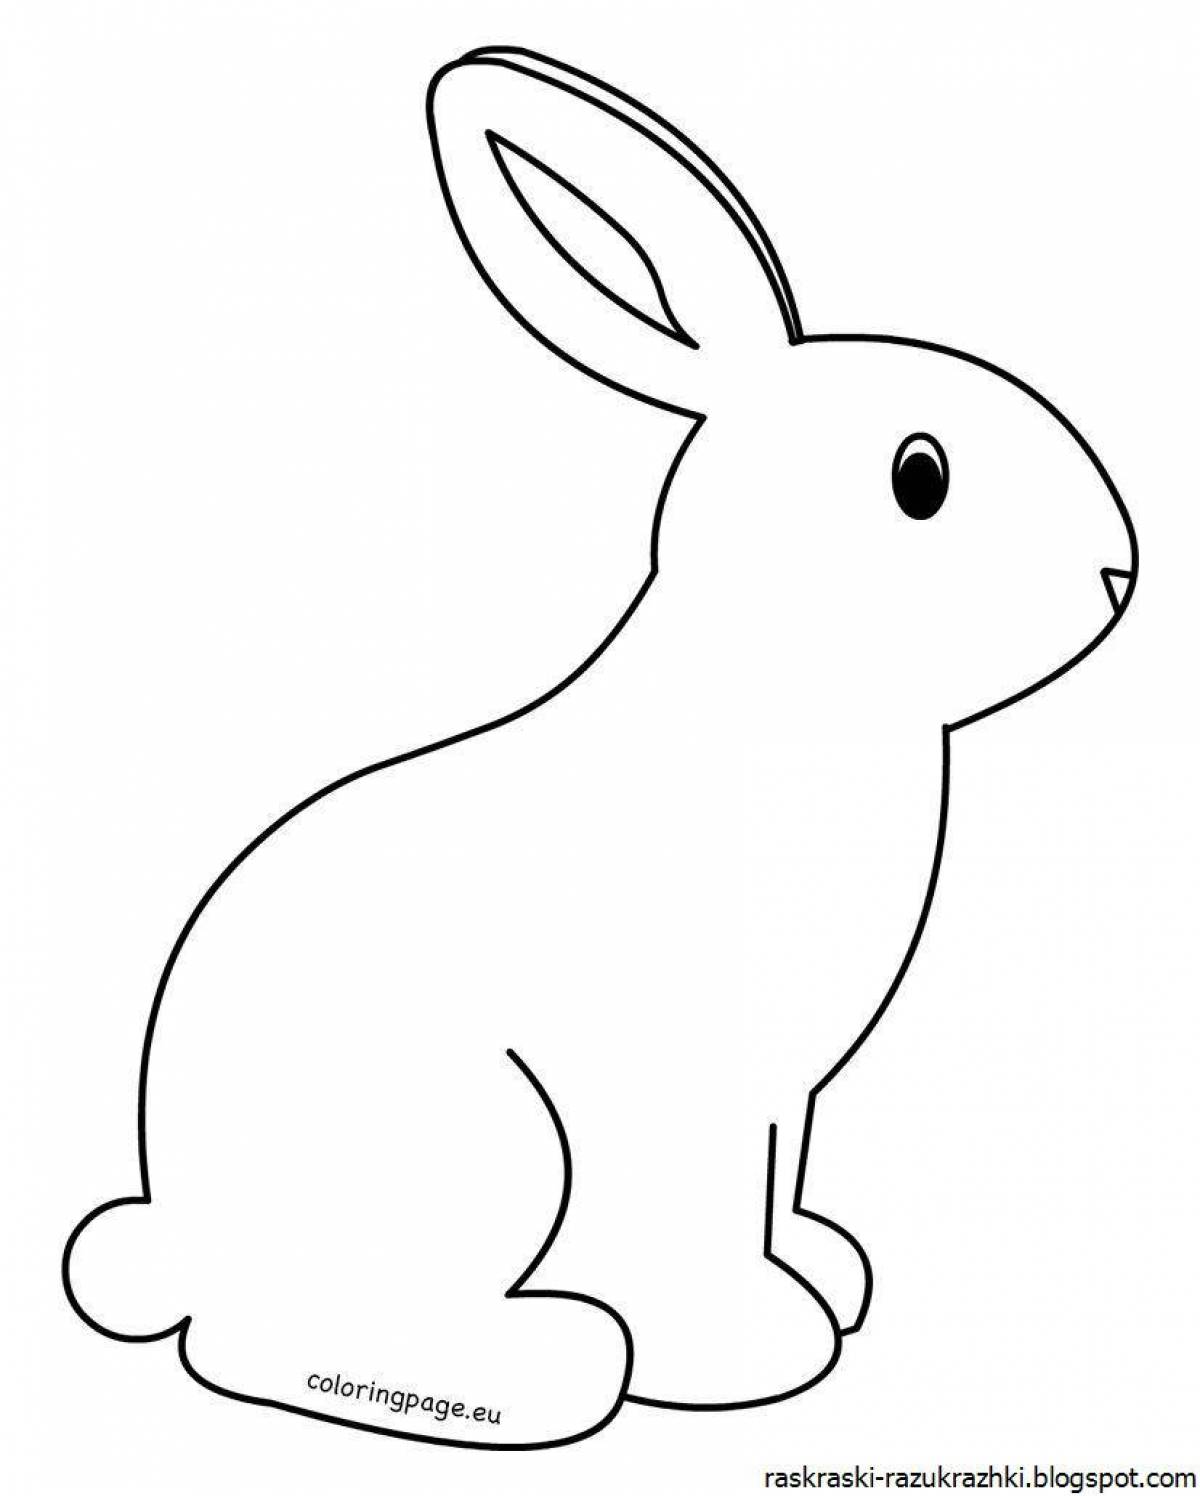 Cute bunny coloring picture